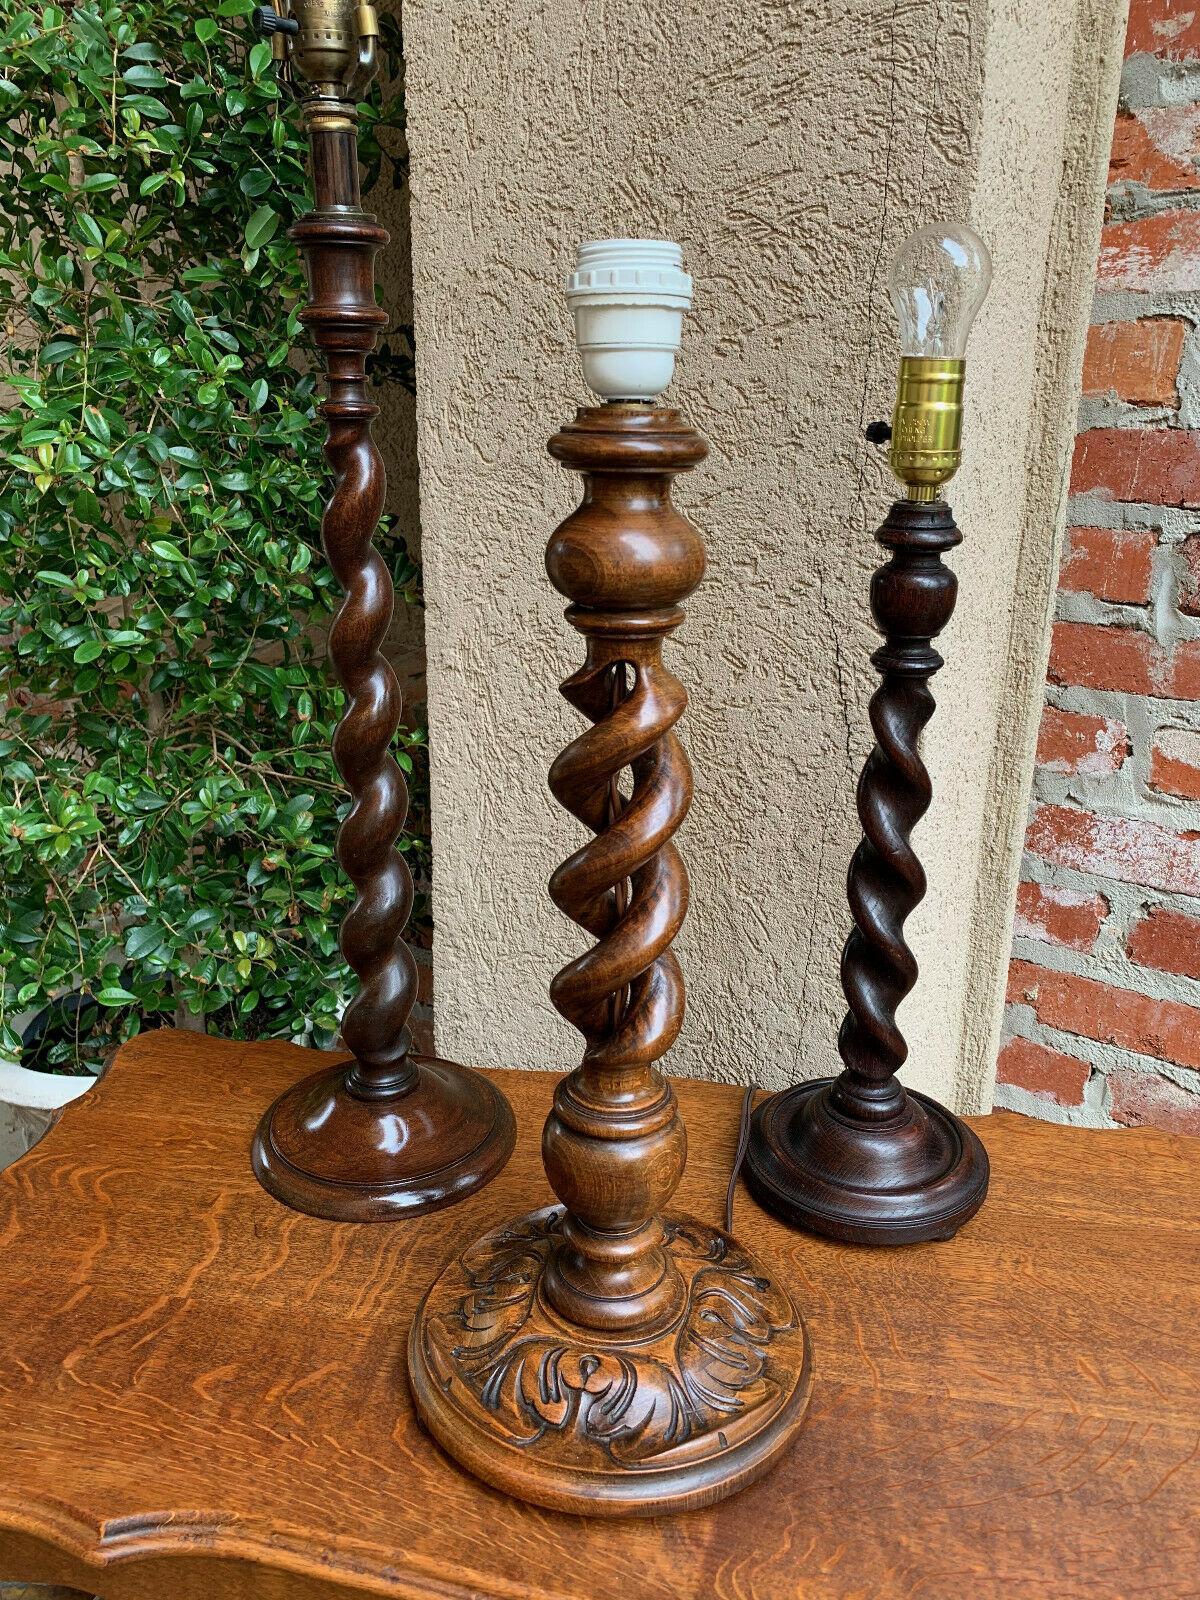 ~Direct from England~
A lovely antique/vintage English barley twist desk or table lamp!~
~Perfect Old World Charm for any room~
~English oak with a dark oak finish~
~Great height for use anywhere, from a side table to nightstand to home